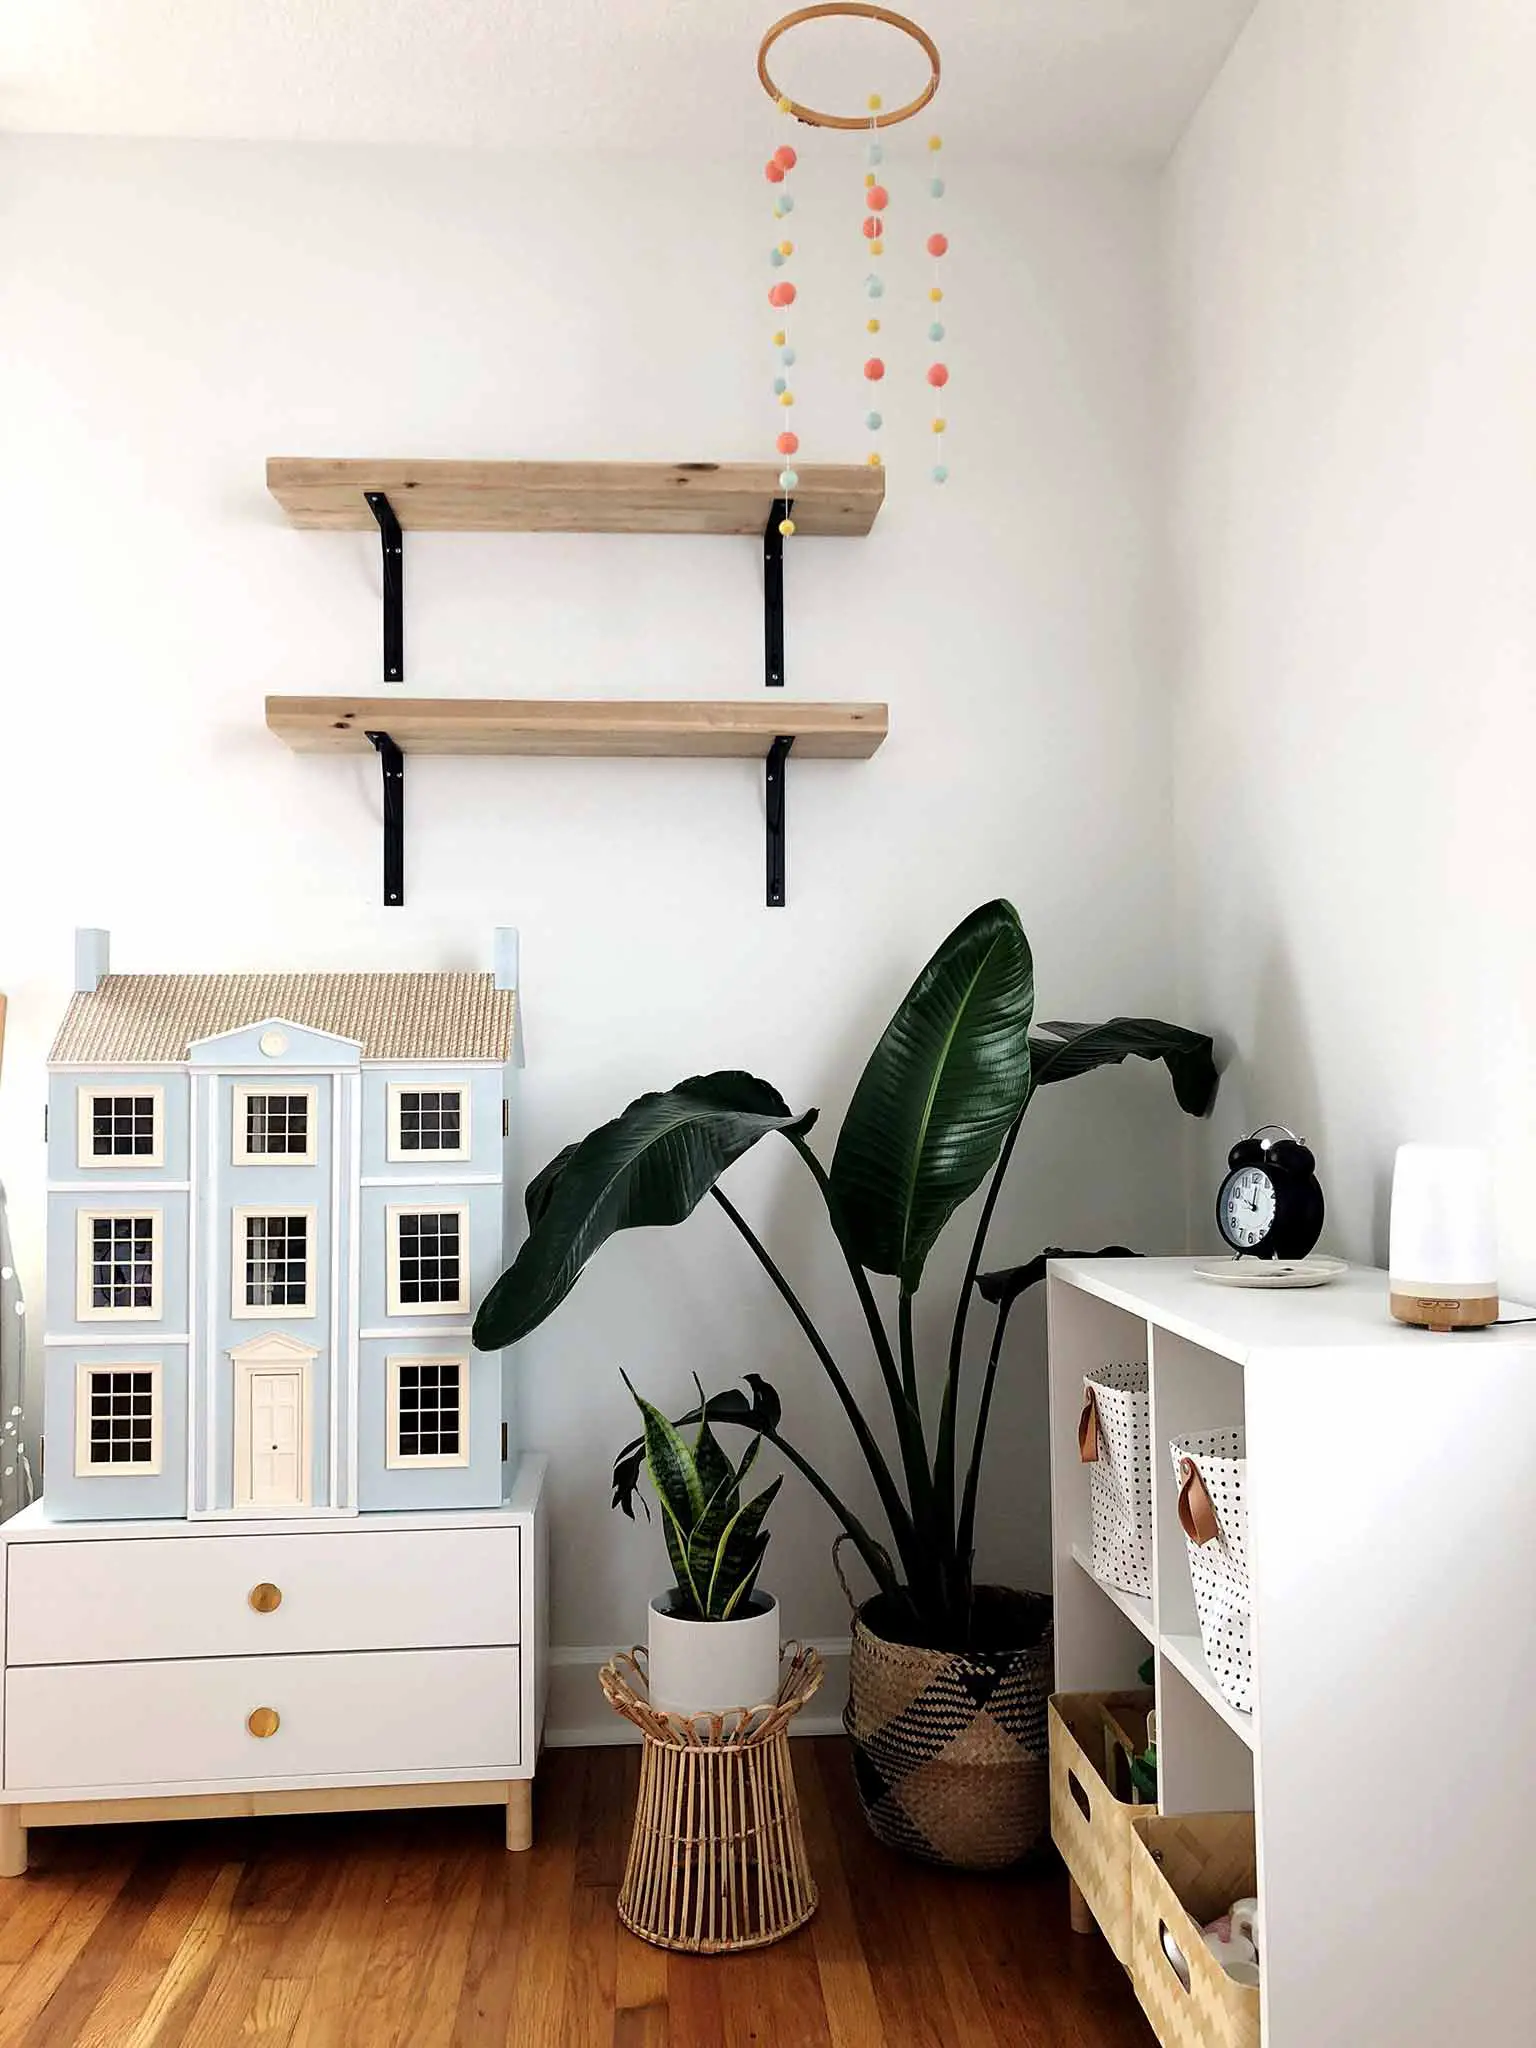 Corner of girls bedroom with wall shelves, plants, doll house and IKEA EKET storage - Guest Participant of the One Room Challenge - That Homebird Life Blog